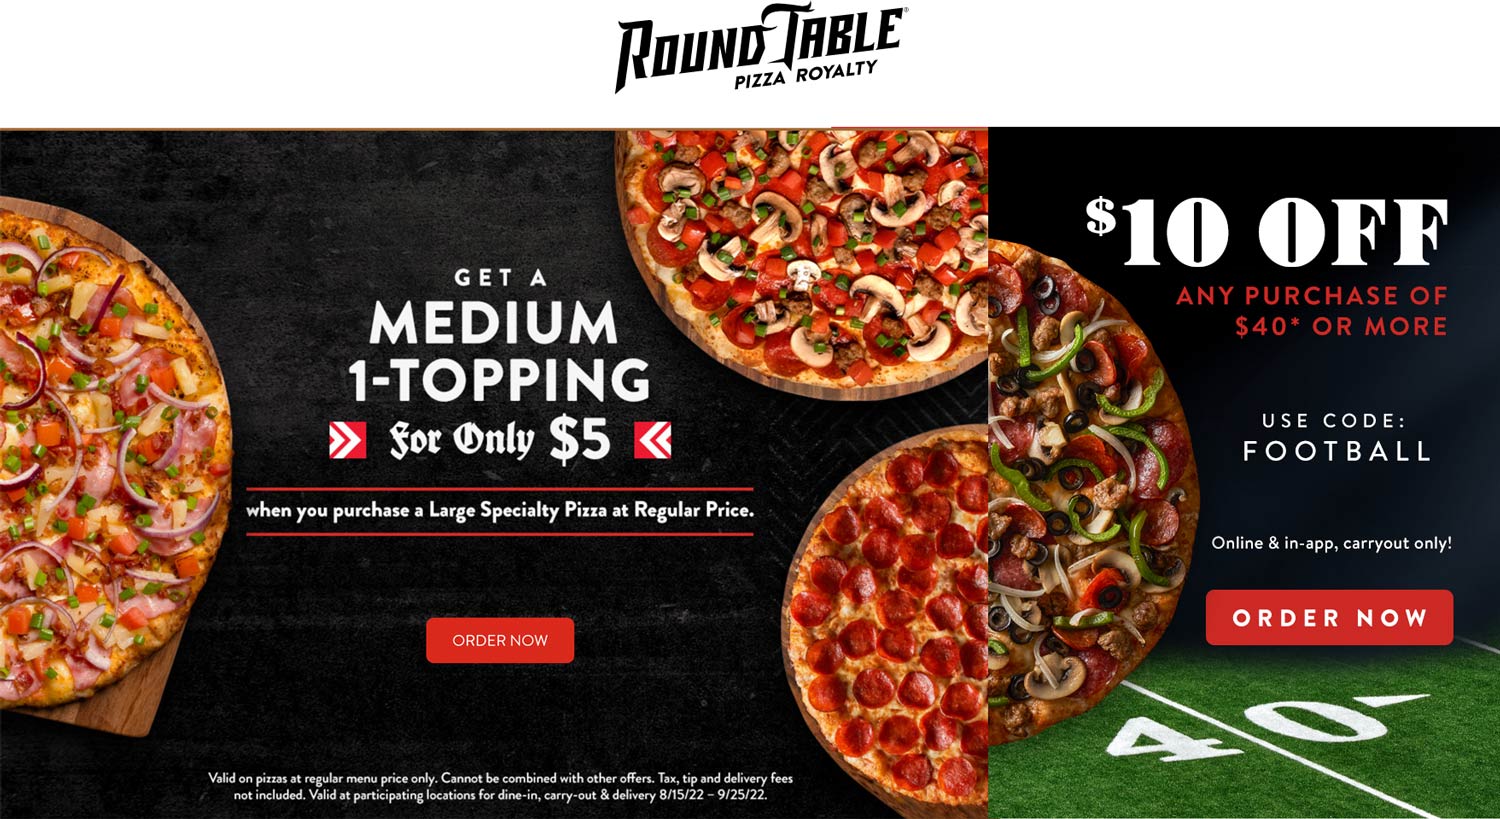 Round Table restaurants Coupon  $10 off $40 today at Round Table pizza via promo code FOOTBALL #roundtable 